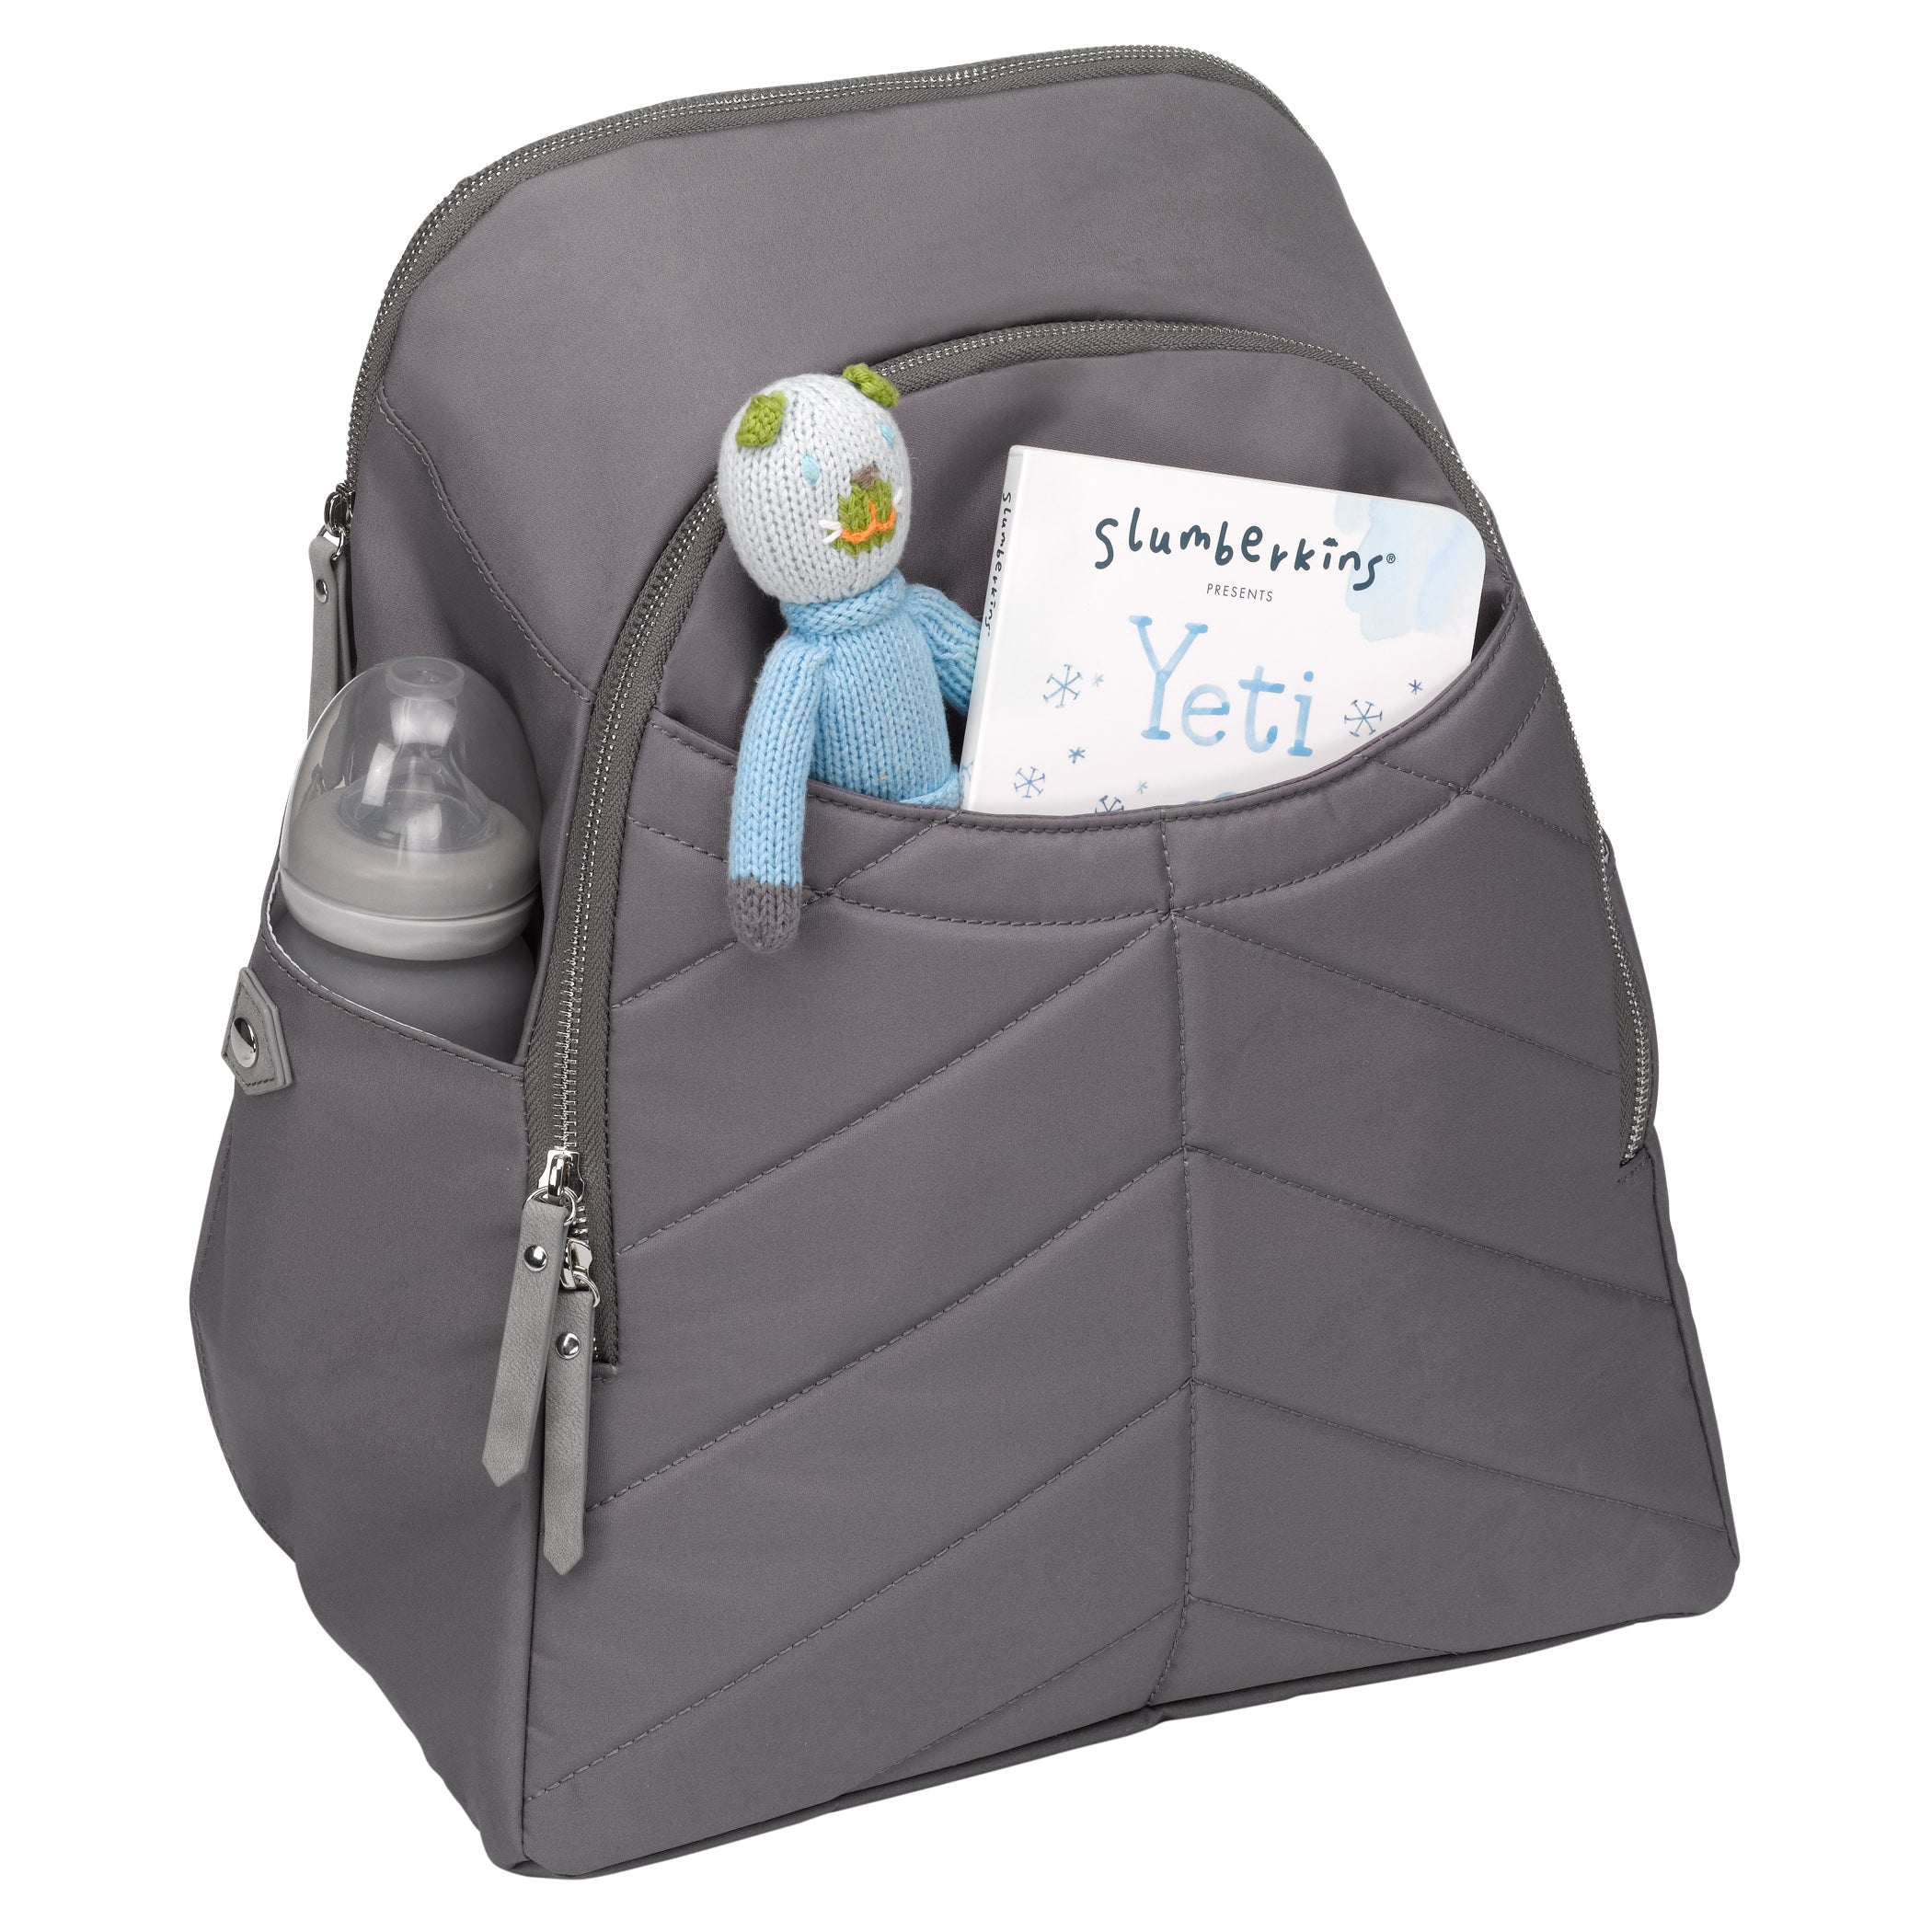 Petunia Pickle Bottom Inter-Mix Slope Backpack in Charcoal